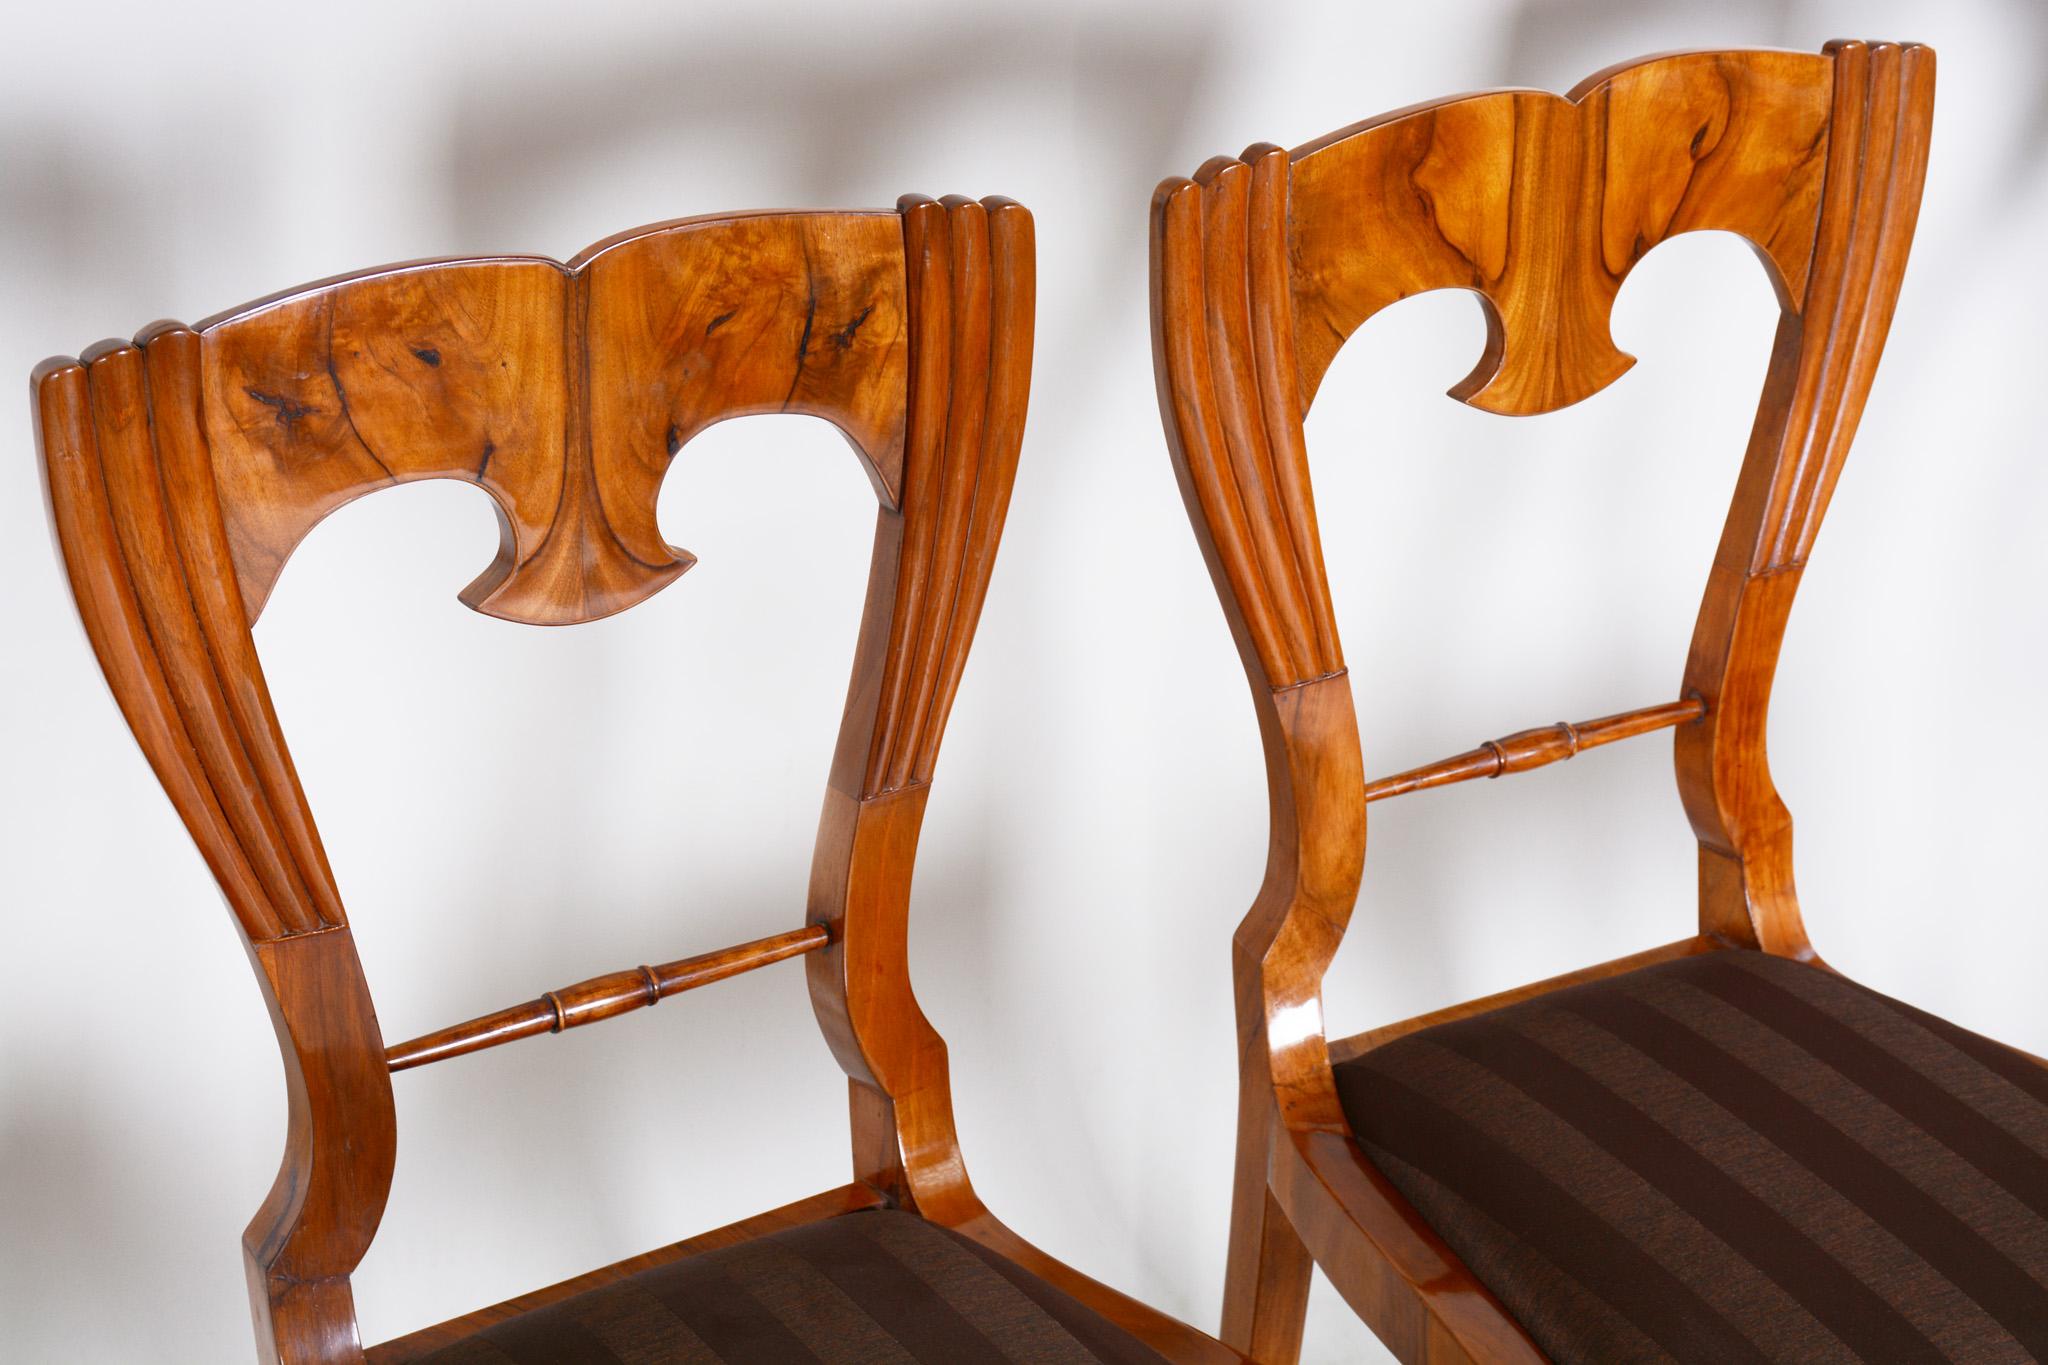 Shipping to any US port only for $290 USD

Set of Biedermeier chairs, four pieces.
Completely restored, new fabric and upholstery included.
Source: Czechia (Bohemia)
Period: 18340-1849
Shellac-polish.

We guarantee safe a the cheapest air transport